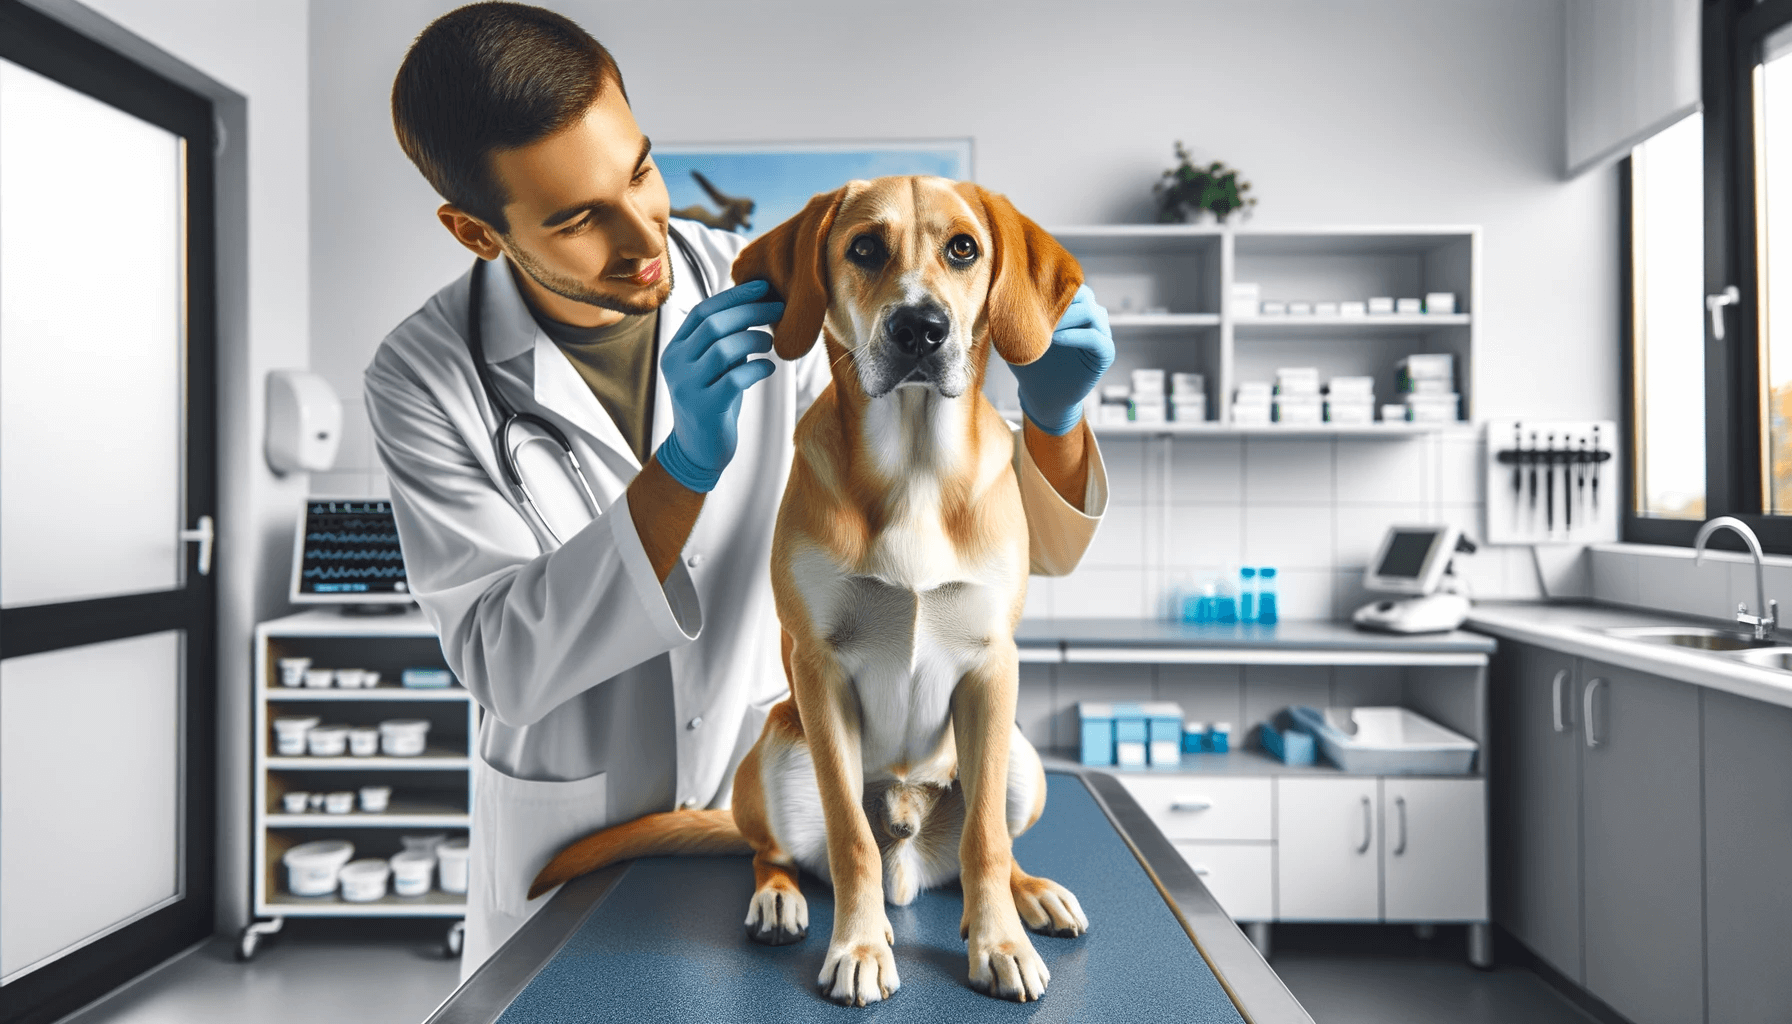 A Lab Hound Mix getting a check-up at the vet, exemplifying the importance of regular health screenings